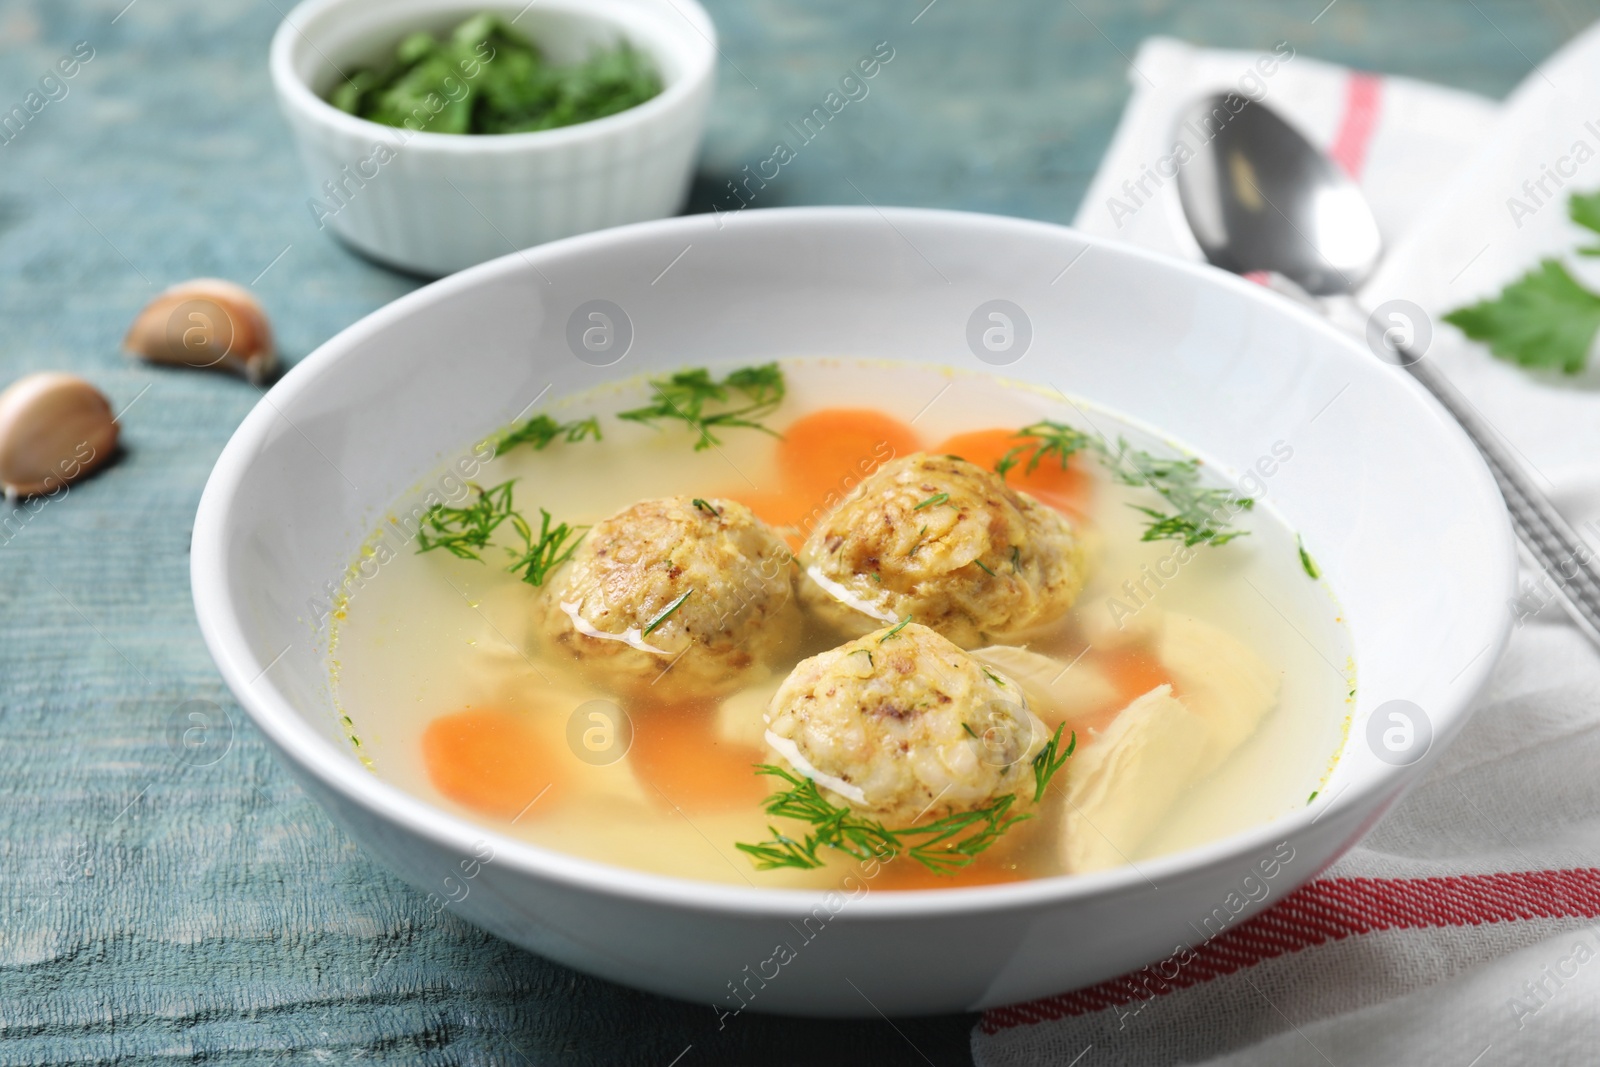 Photo of Bowl of Jewish matzoh balls soup on color wooden table